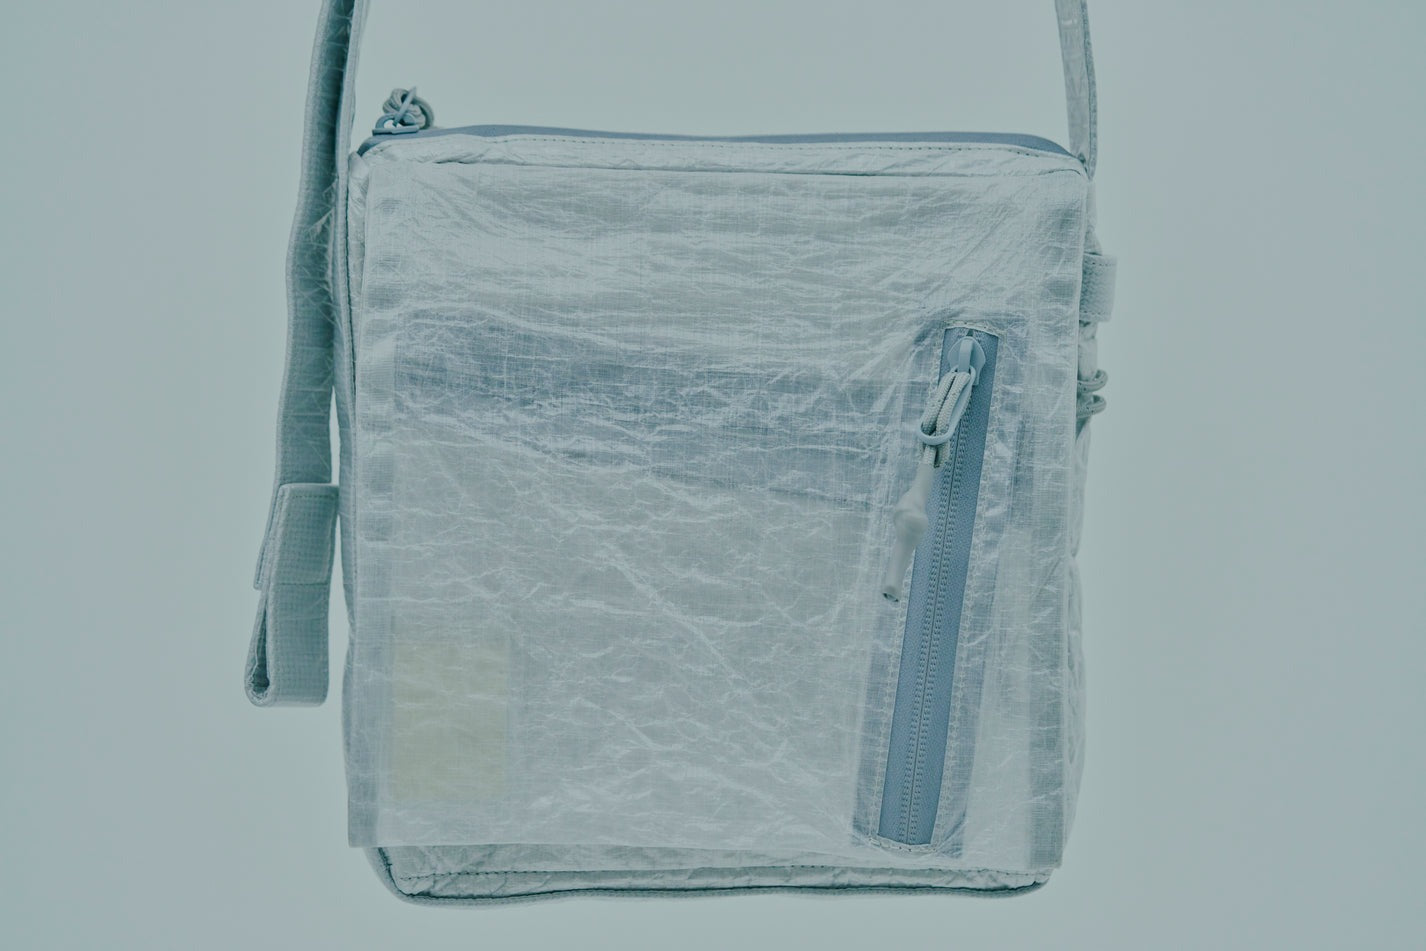 double structure square BAG